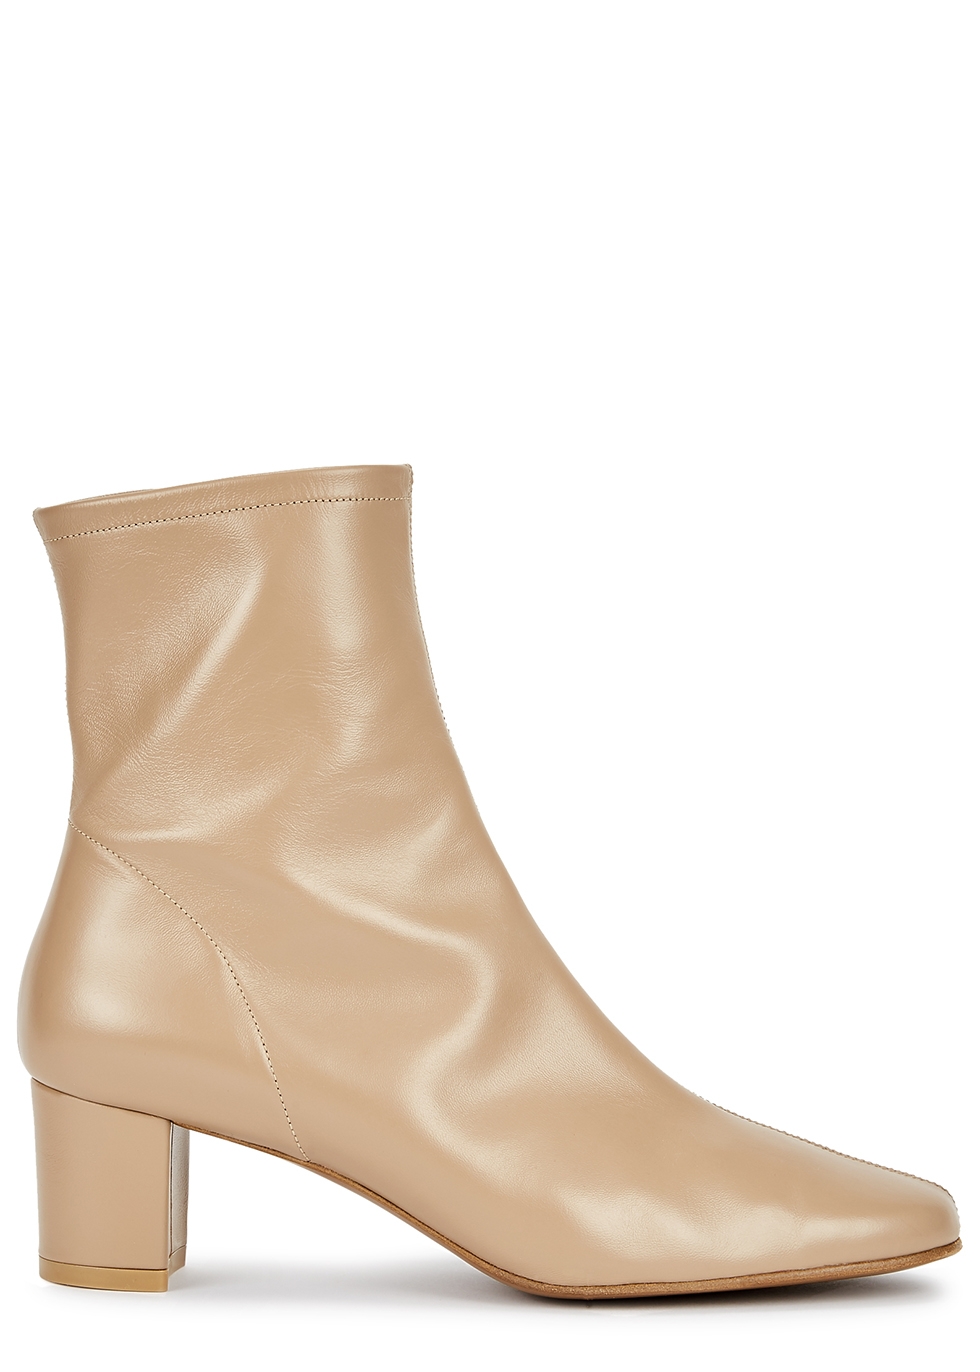 Sofia 65 taupe leather ankle boots